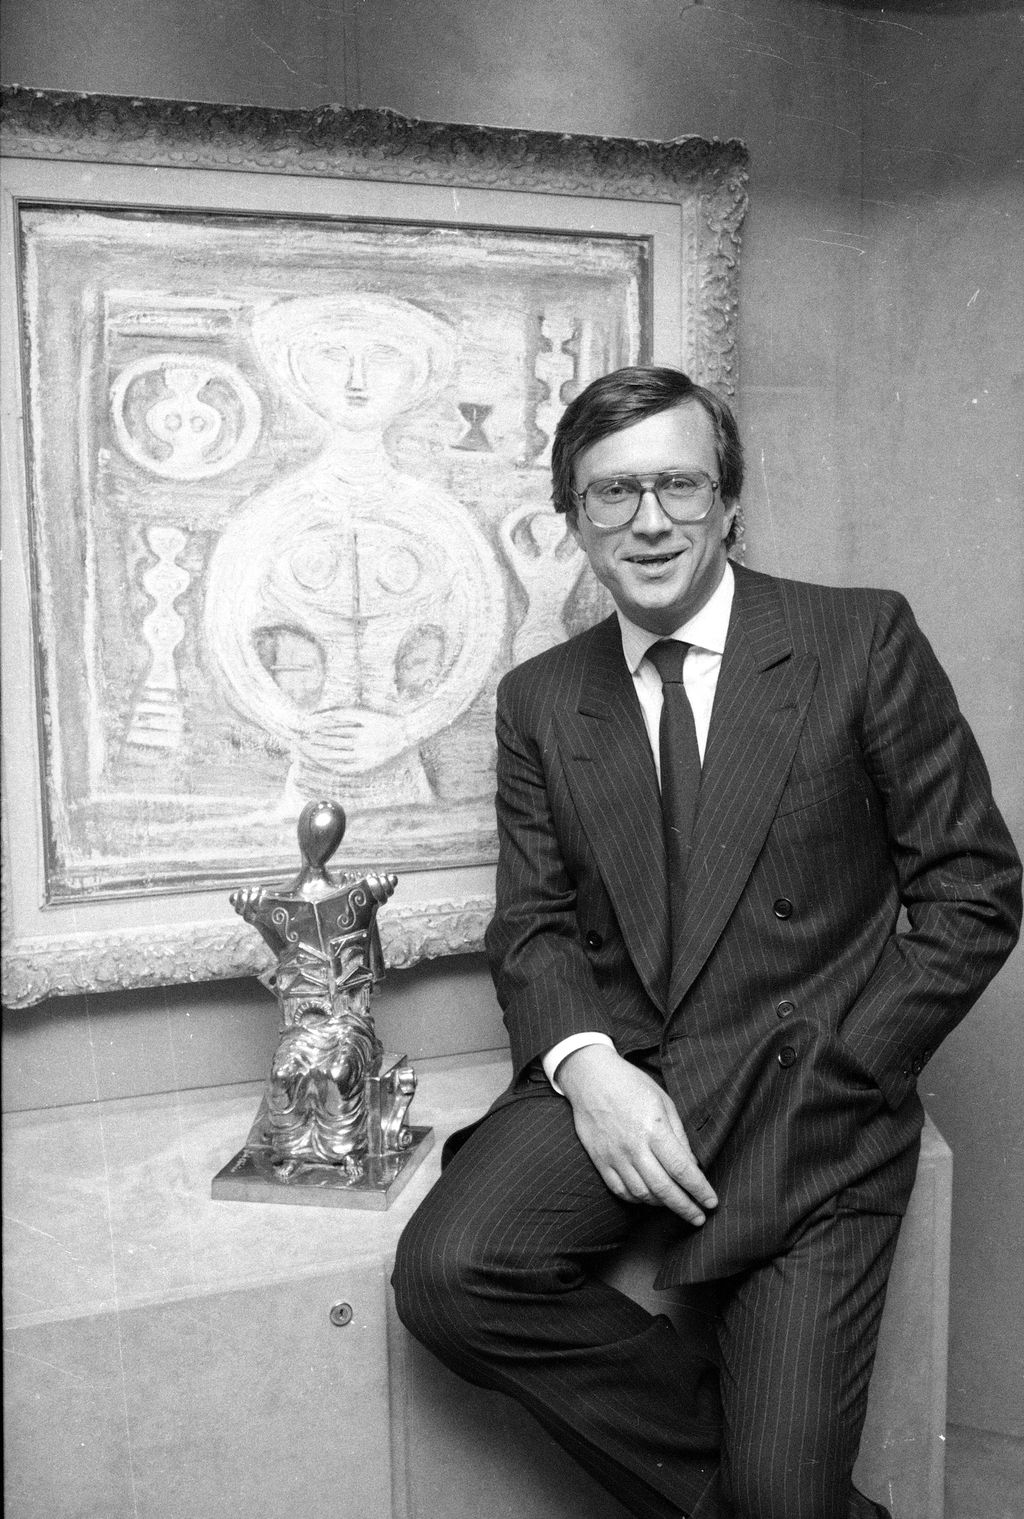 Maurizio Gucci, the new chairman of the board at Gucci, poses in the Gucci offices in New York, April 20, 1985.  The grandson of founder Guccio Gucci, Maurizio took over as head of the renowned accessory house in November after his uncle, Aldo Gucci, settled into 